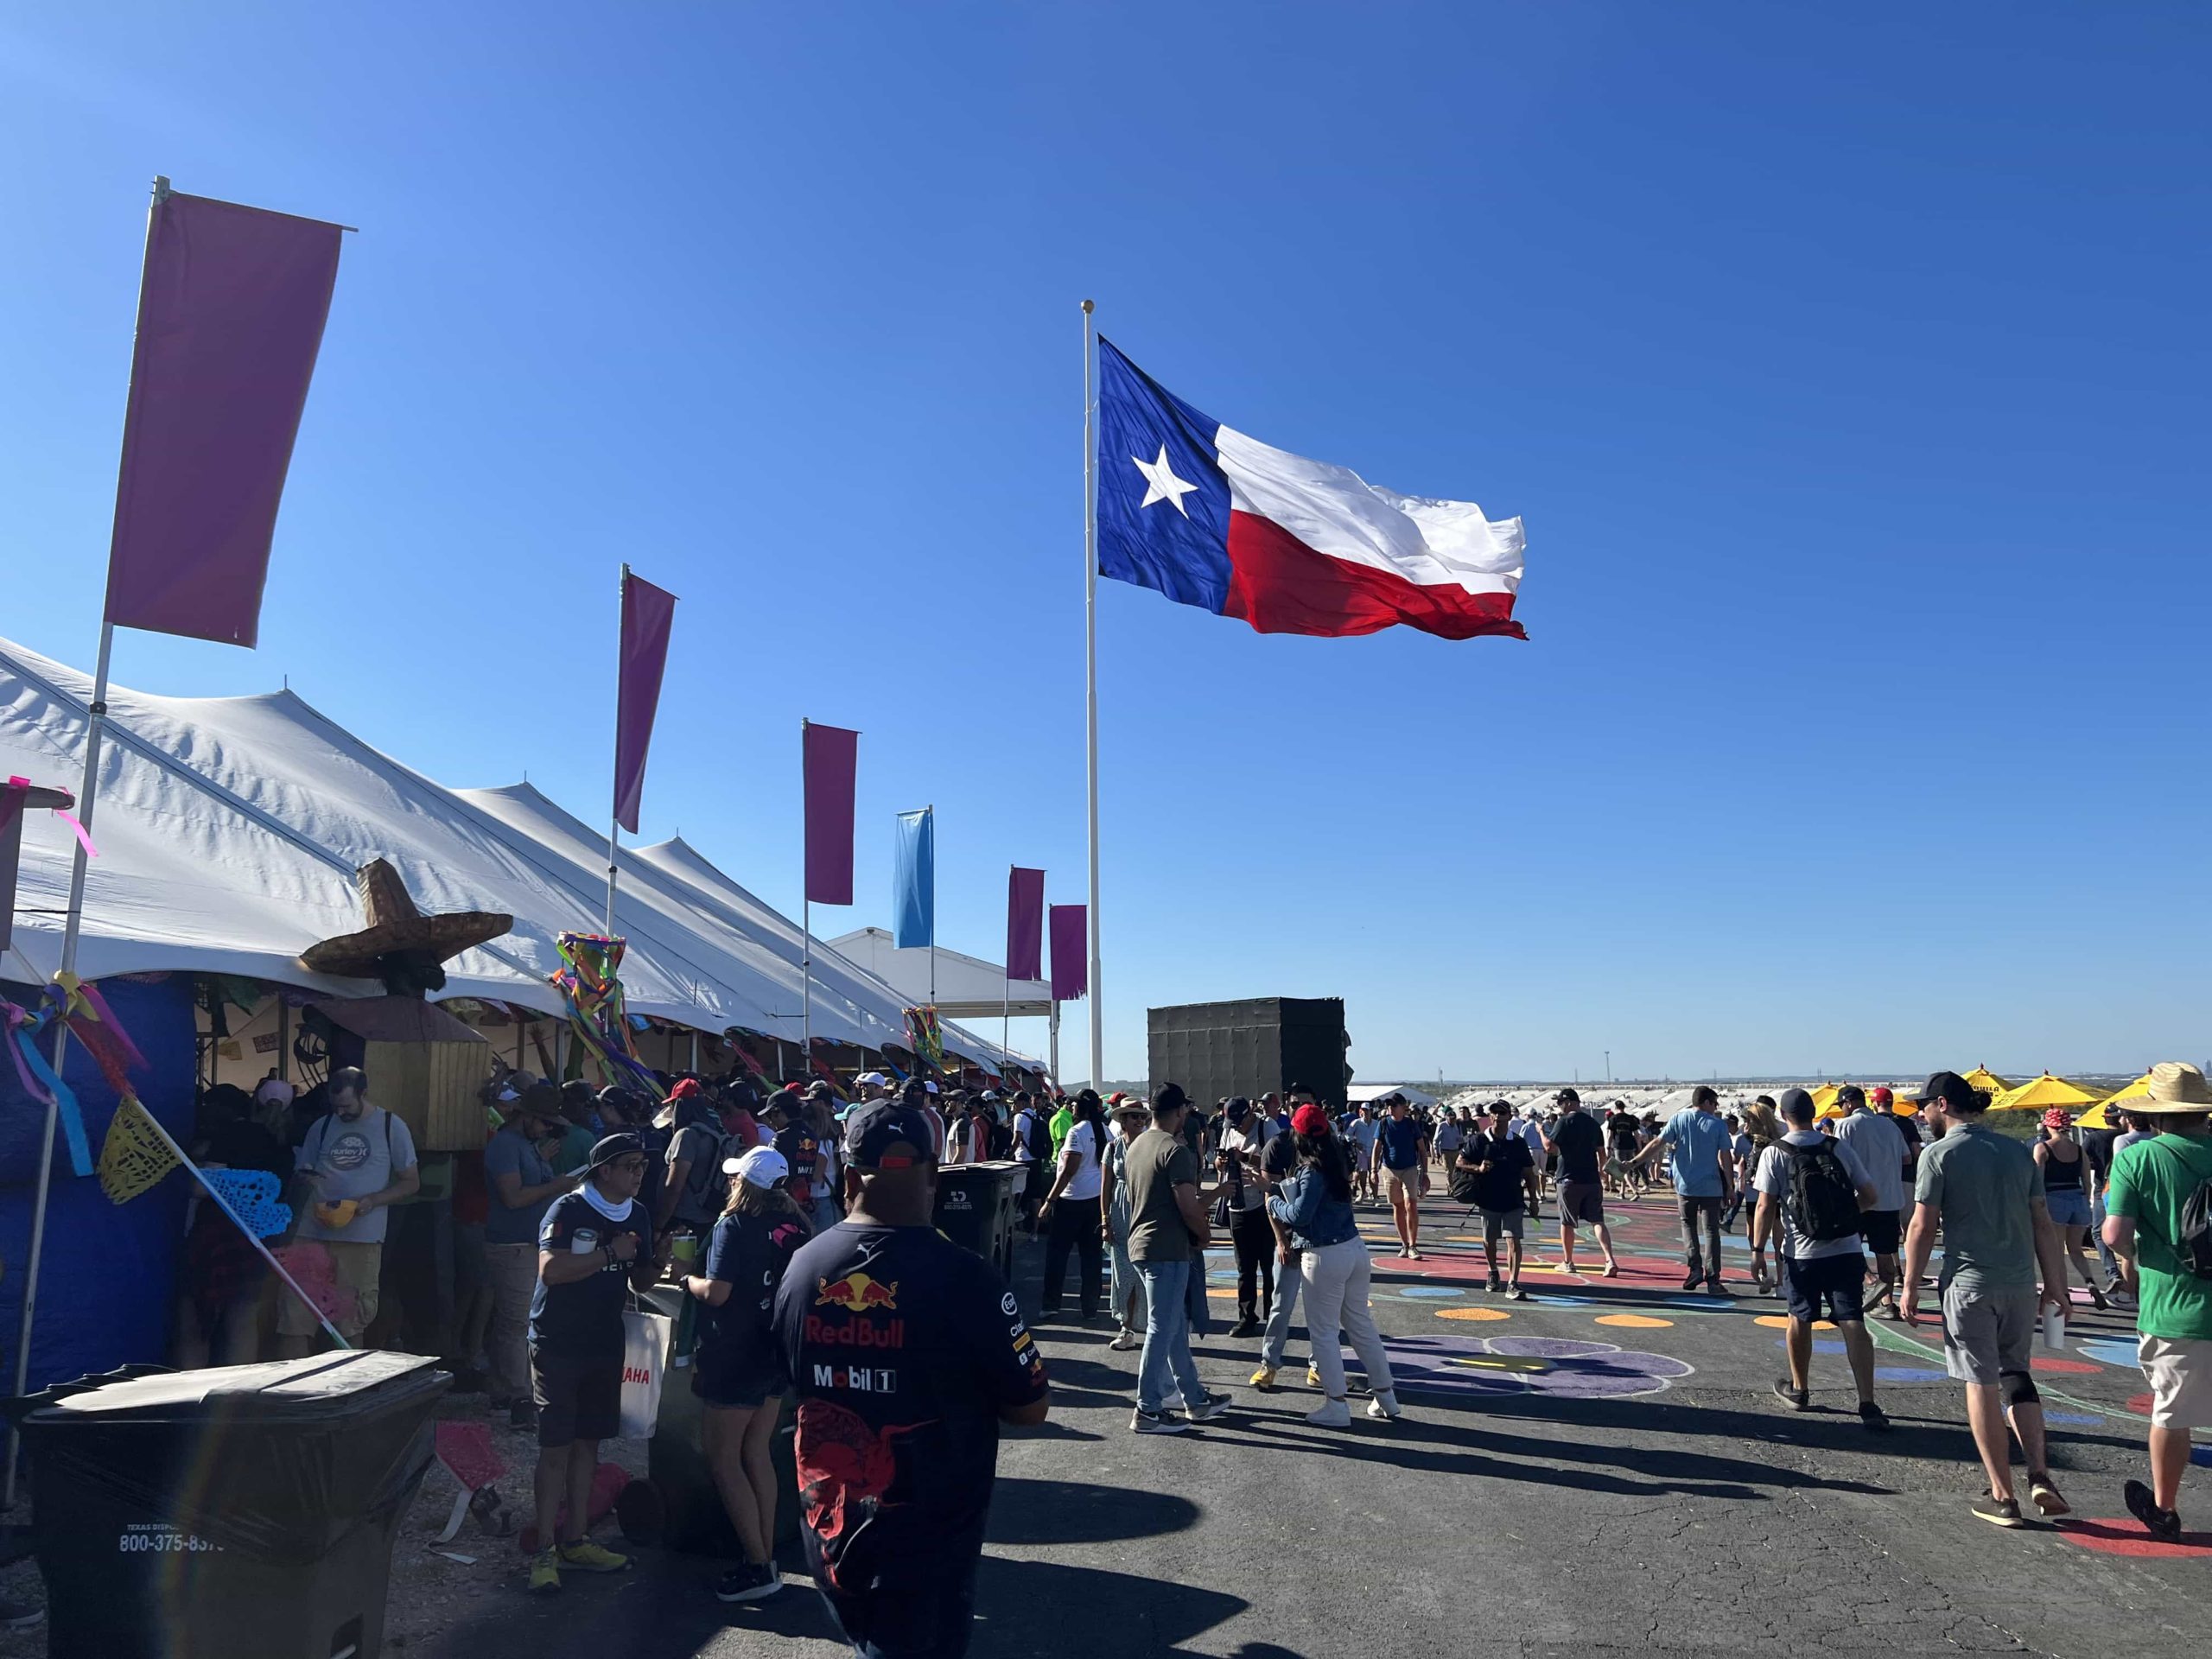 A crowd of F1 fans in front of a food village, with a giant Texan flag in the background